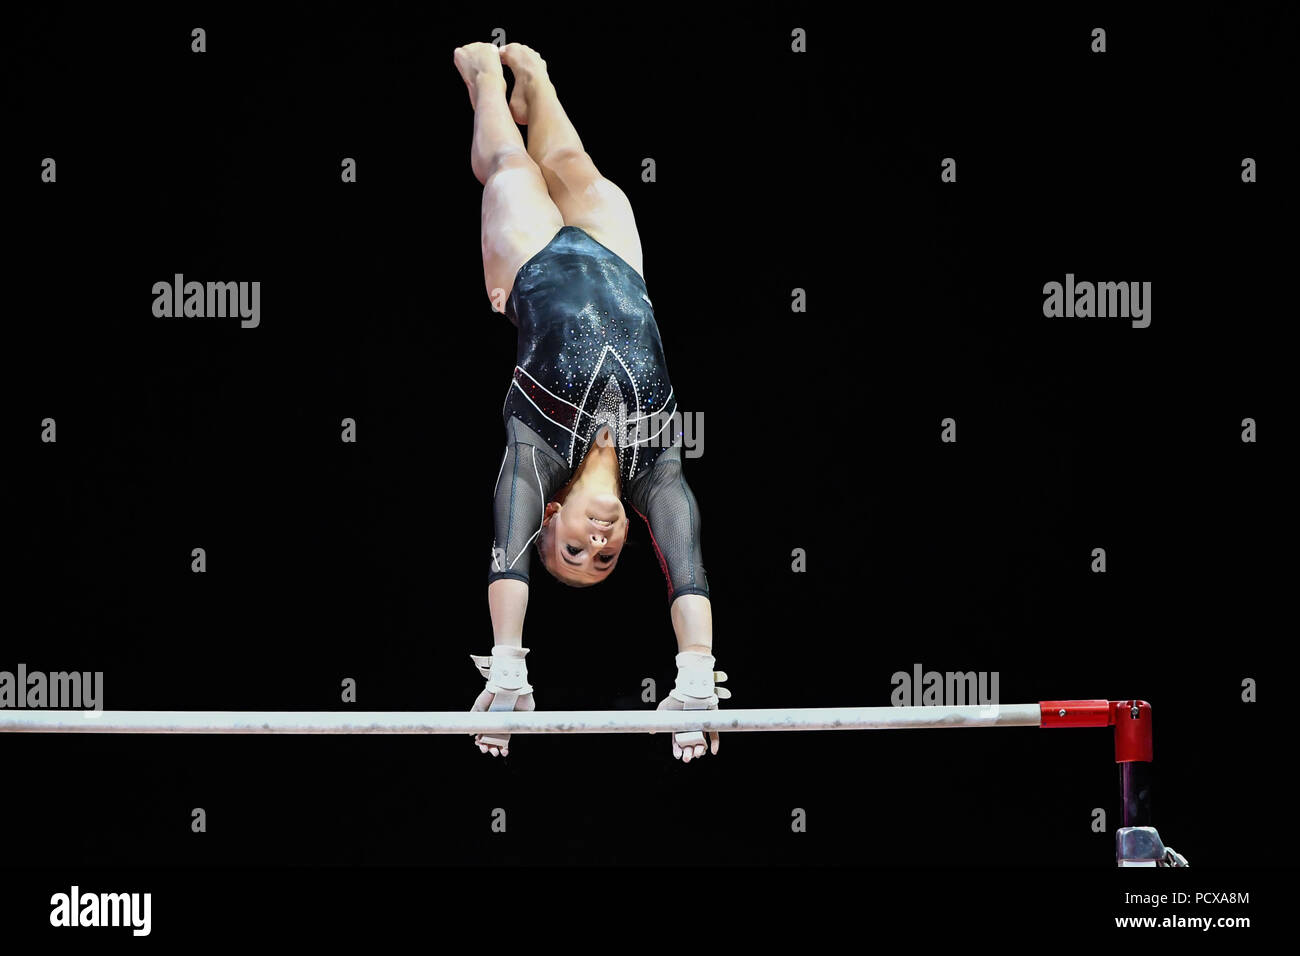 Glasgow, UK, 4 Aug 2018. LINARI Noemi Francesca (ITA) competes on Uneven Bars in Women's Artistic Gymnastics Team Final during the European Championships Glasgow 2018 at The SSE Hydro on Saturday, 04 August 2018. GLASGOW SCOTLAND . Credit: Taka G Wu Credit: Taka Wu/Alamy Live News Stock Photo